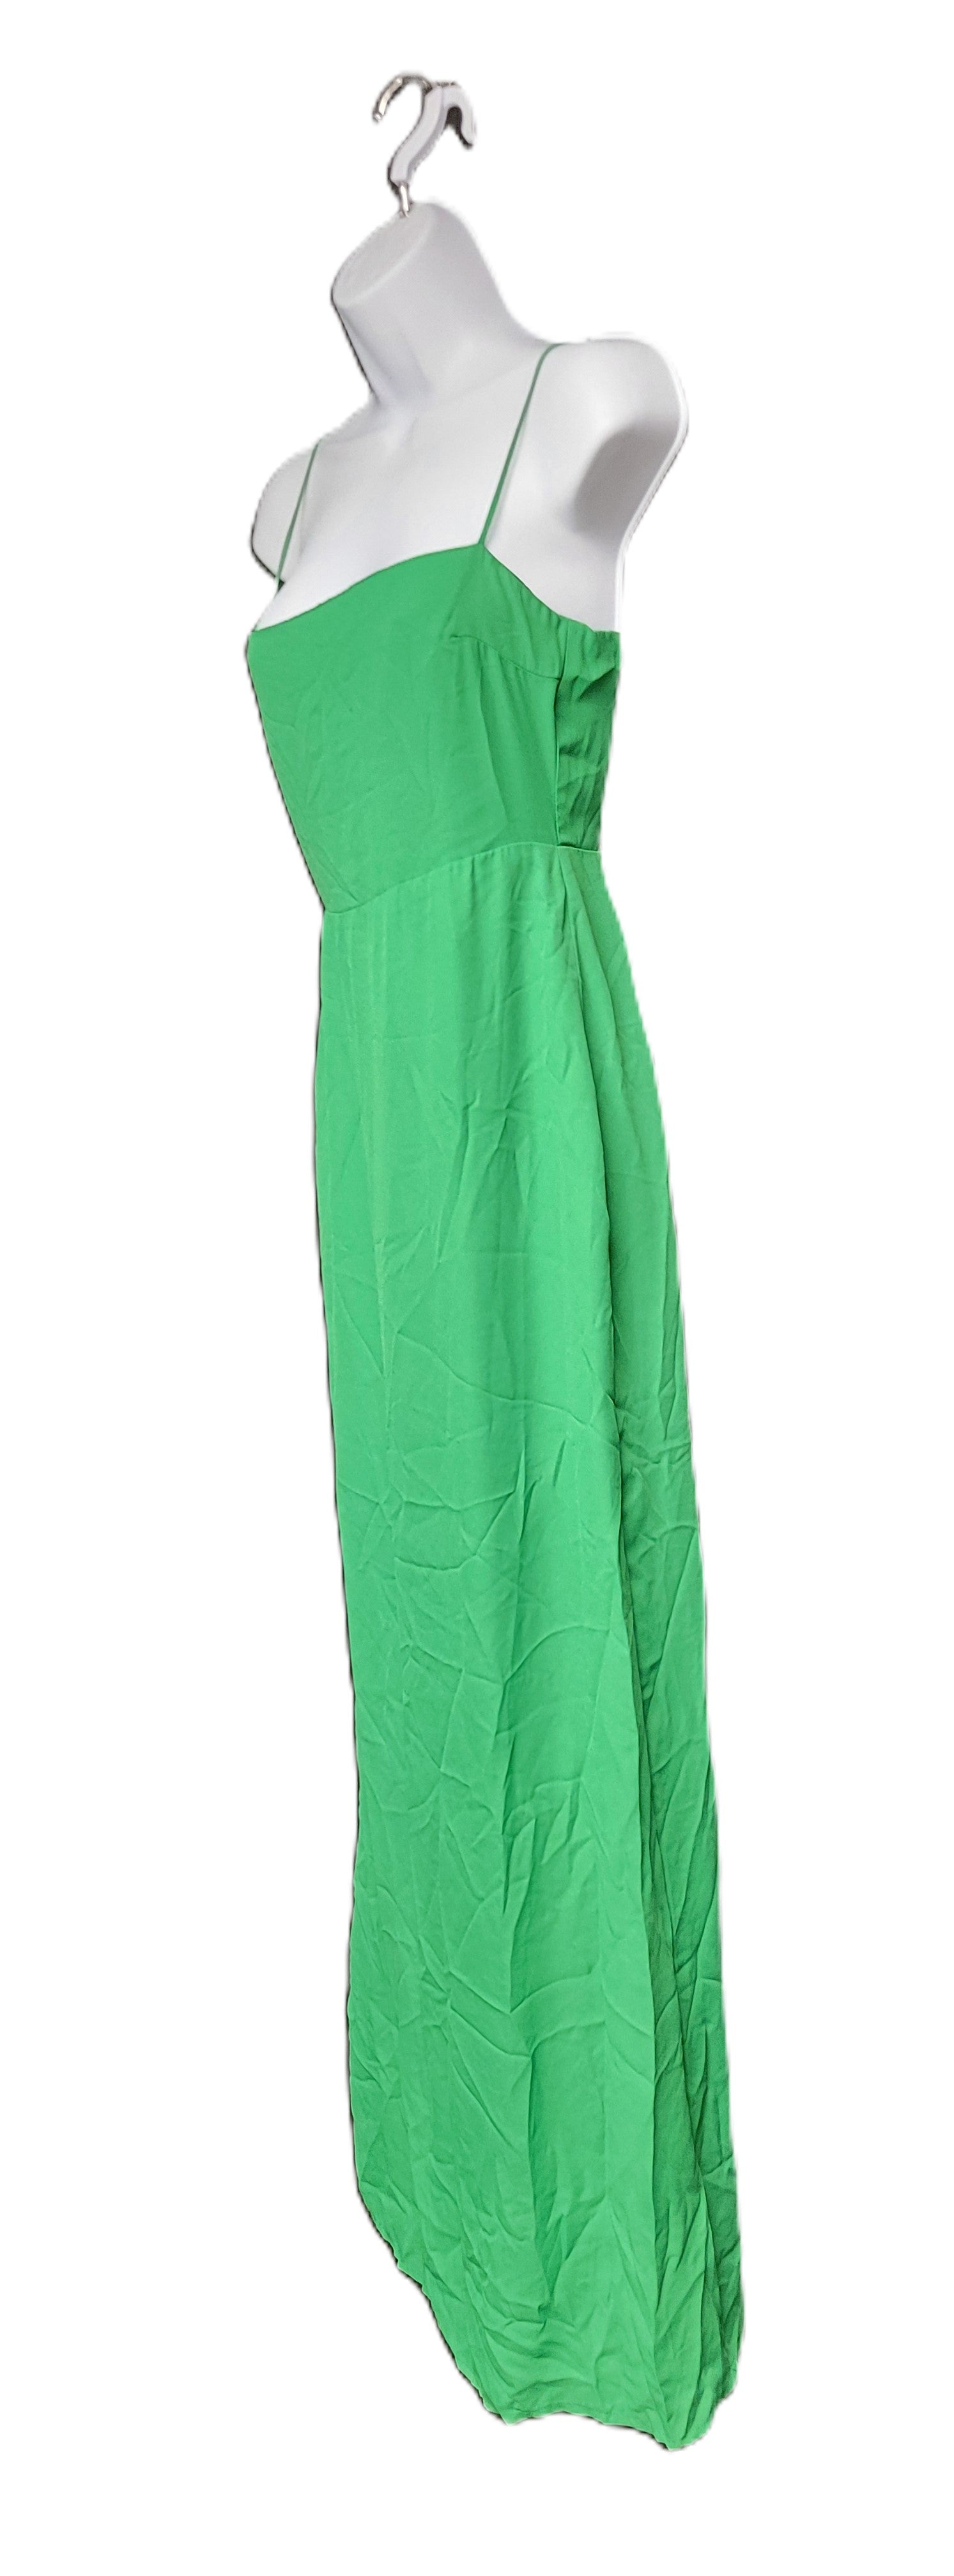 Superdown Addison Maxi Dress in Kelly Green Size Small